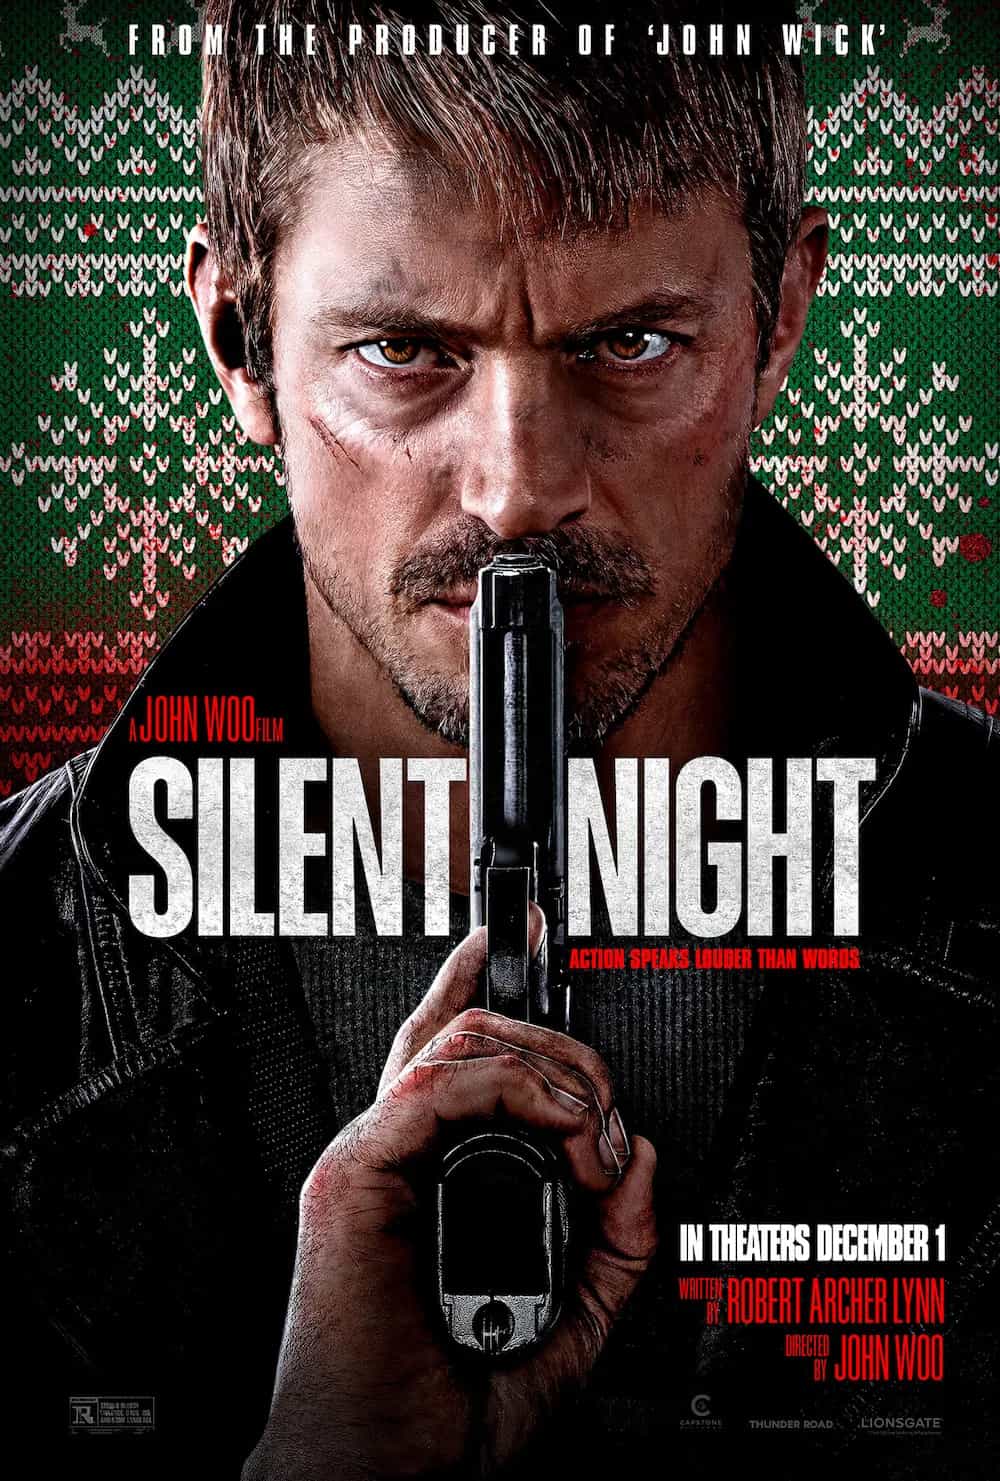 Check out the new trailer for upcoming movie Silent Night which stars Joel Kinnaman and Catalina Sandino Moreno #silentnight